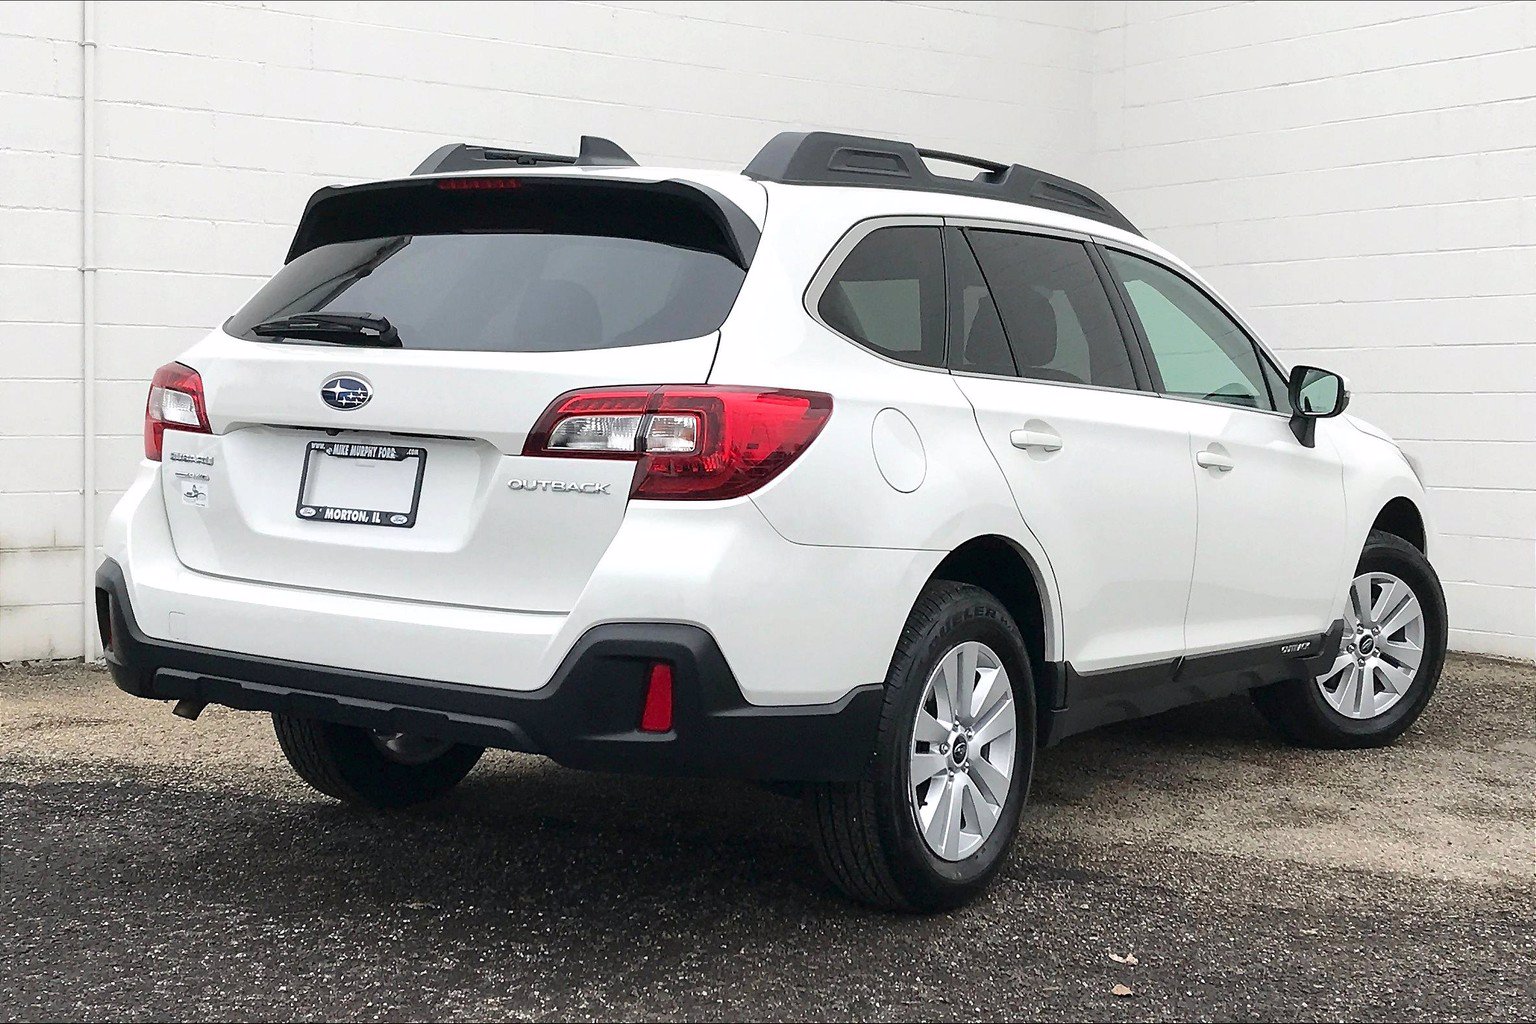 PreOwned 2018 Subaru Outback 2.5i 4D Sport Utility in